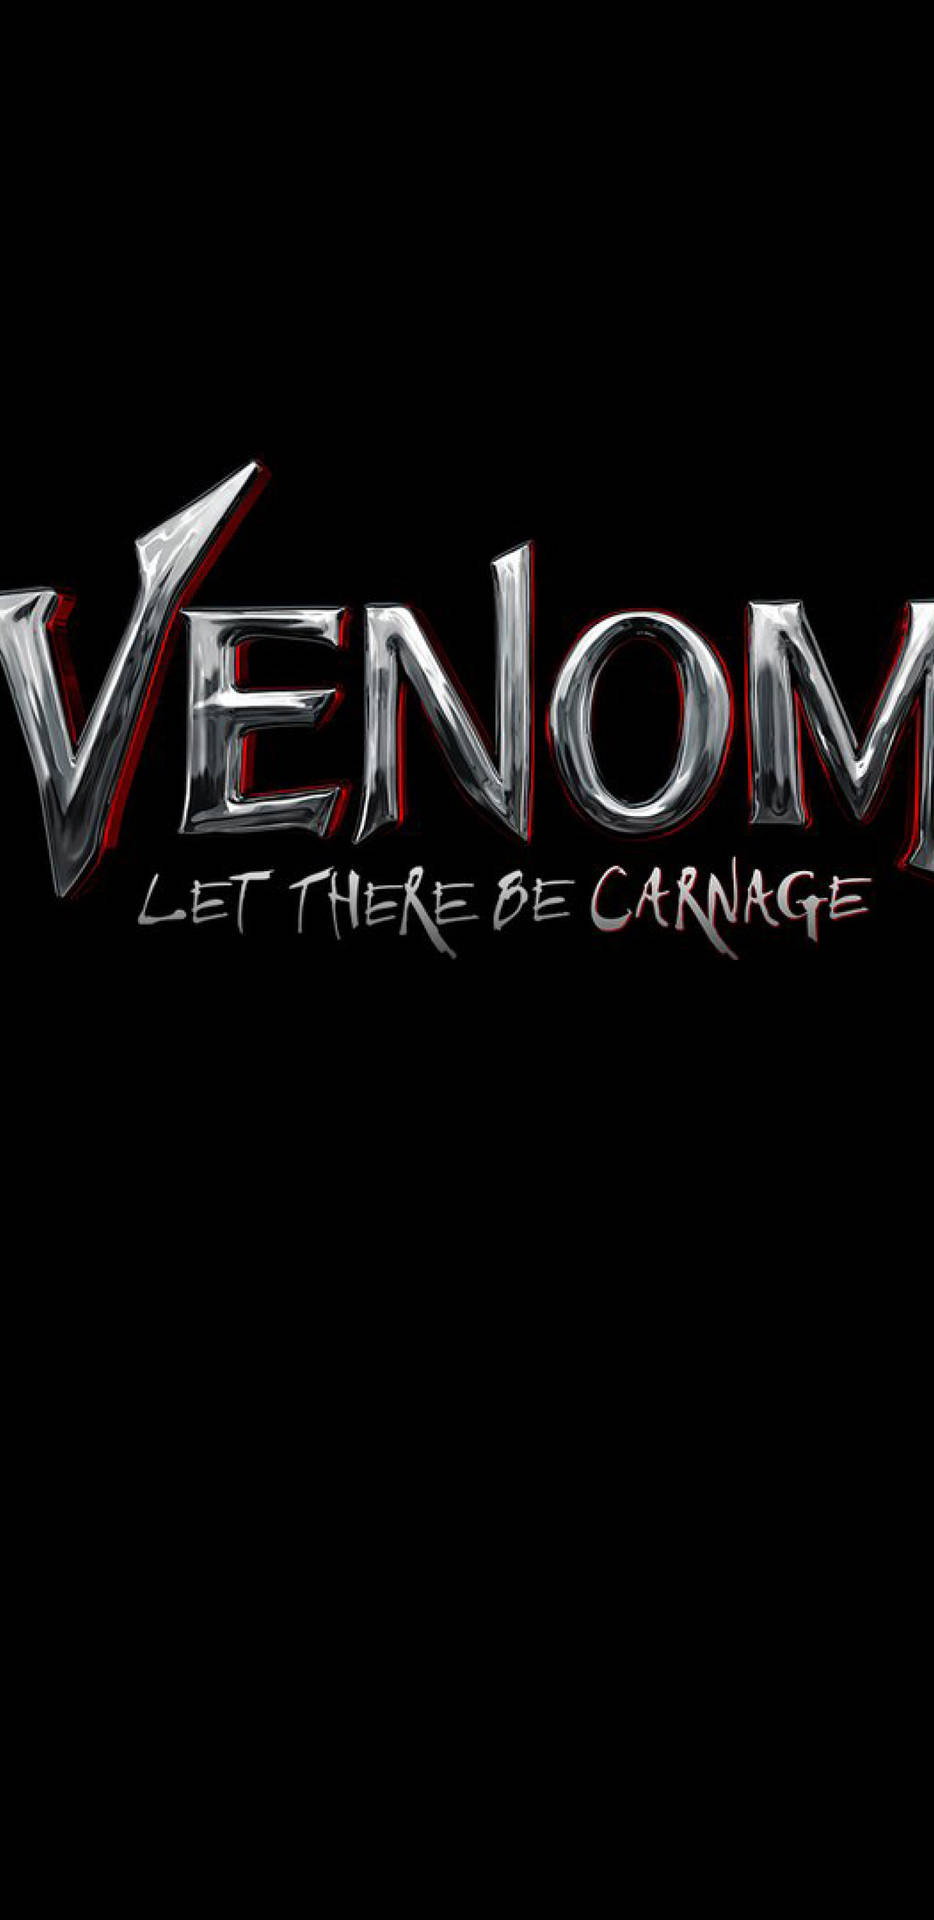 Venom Let There Be Carnage Lettering Wallpaper